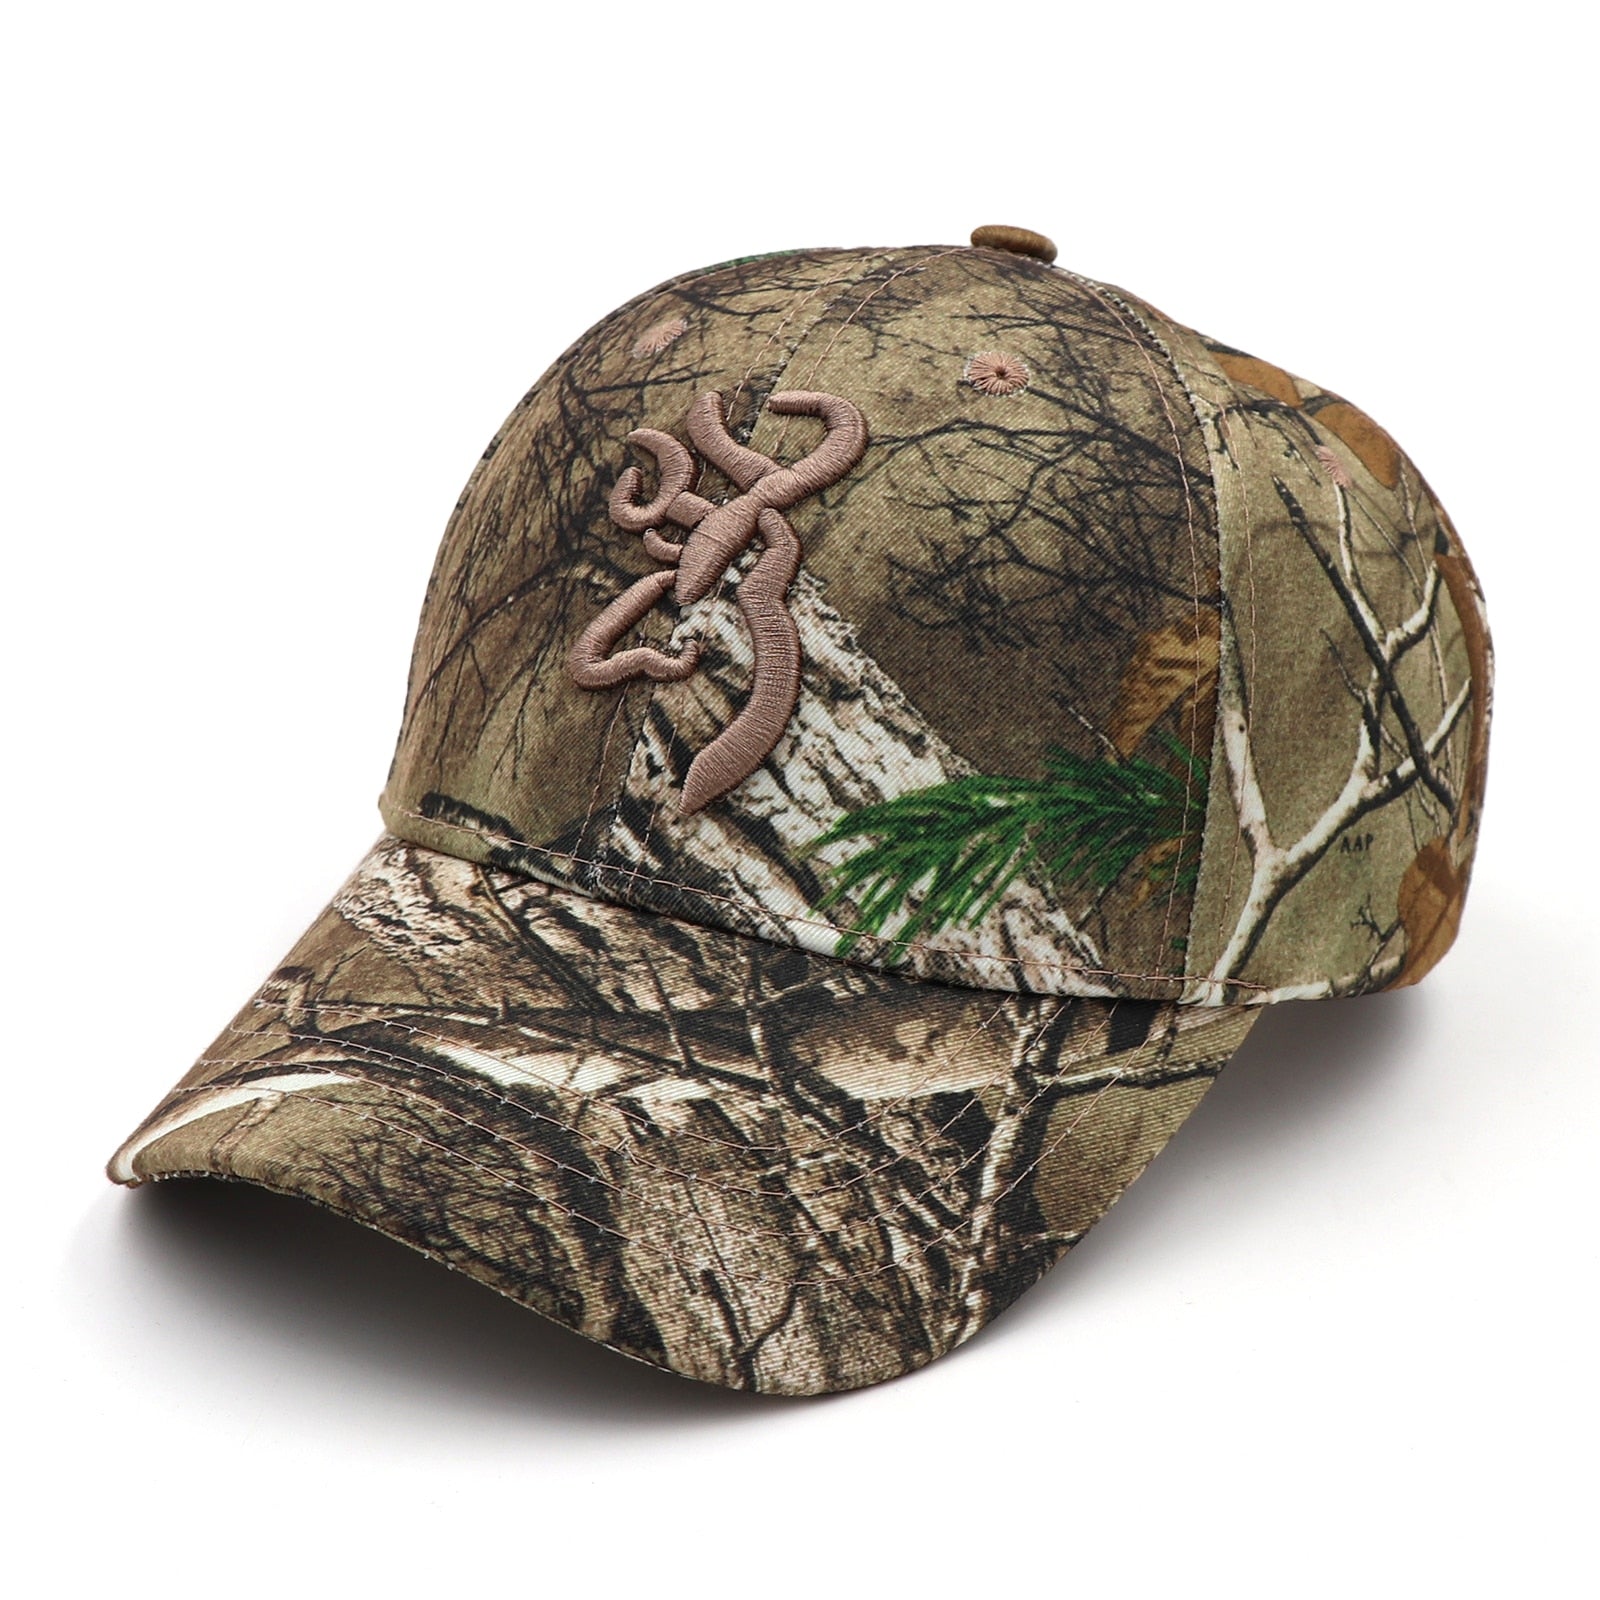 KOEP New Camo Baseball Cap Fishing Caps Men Outdoor Hunting Camouflage Jungle Hat Airsoft Tactical Hiking Casquette Hats